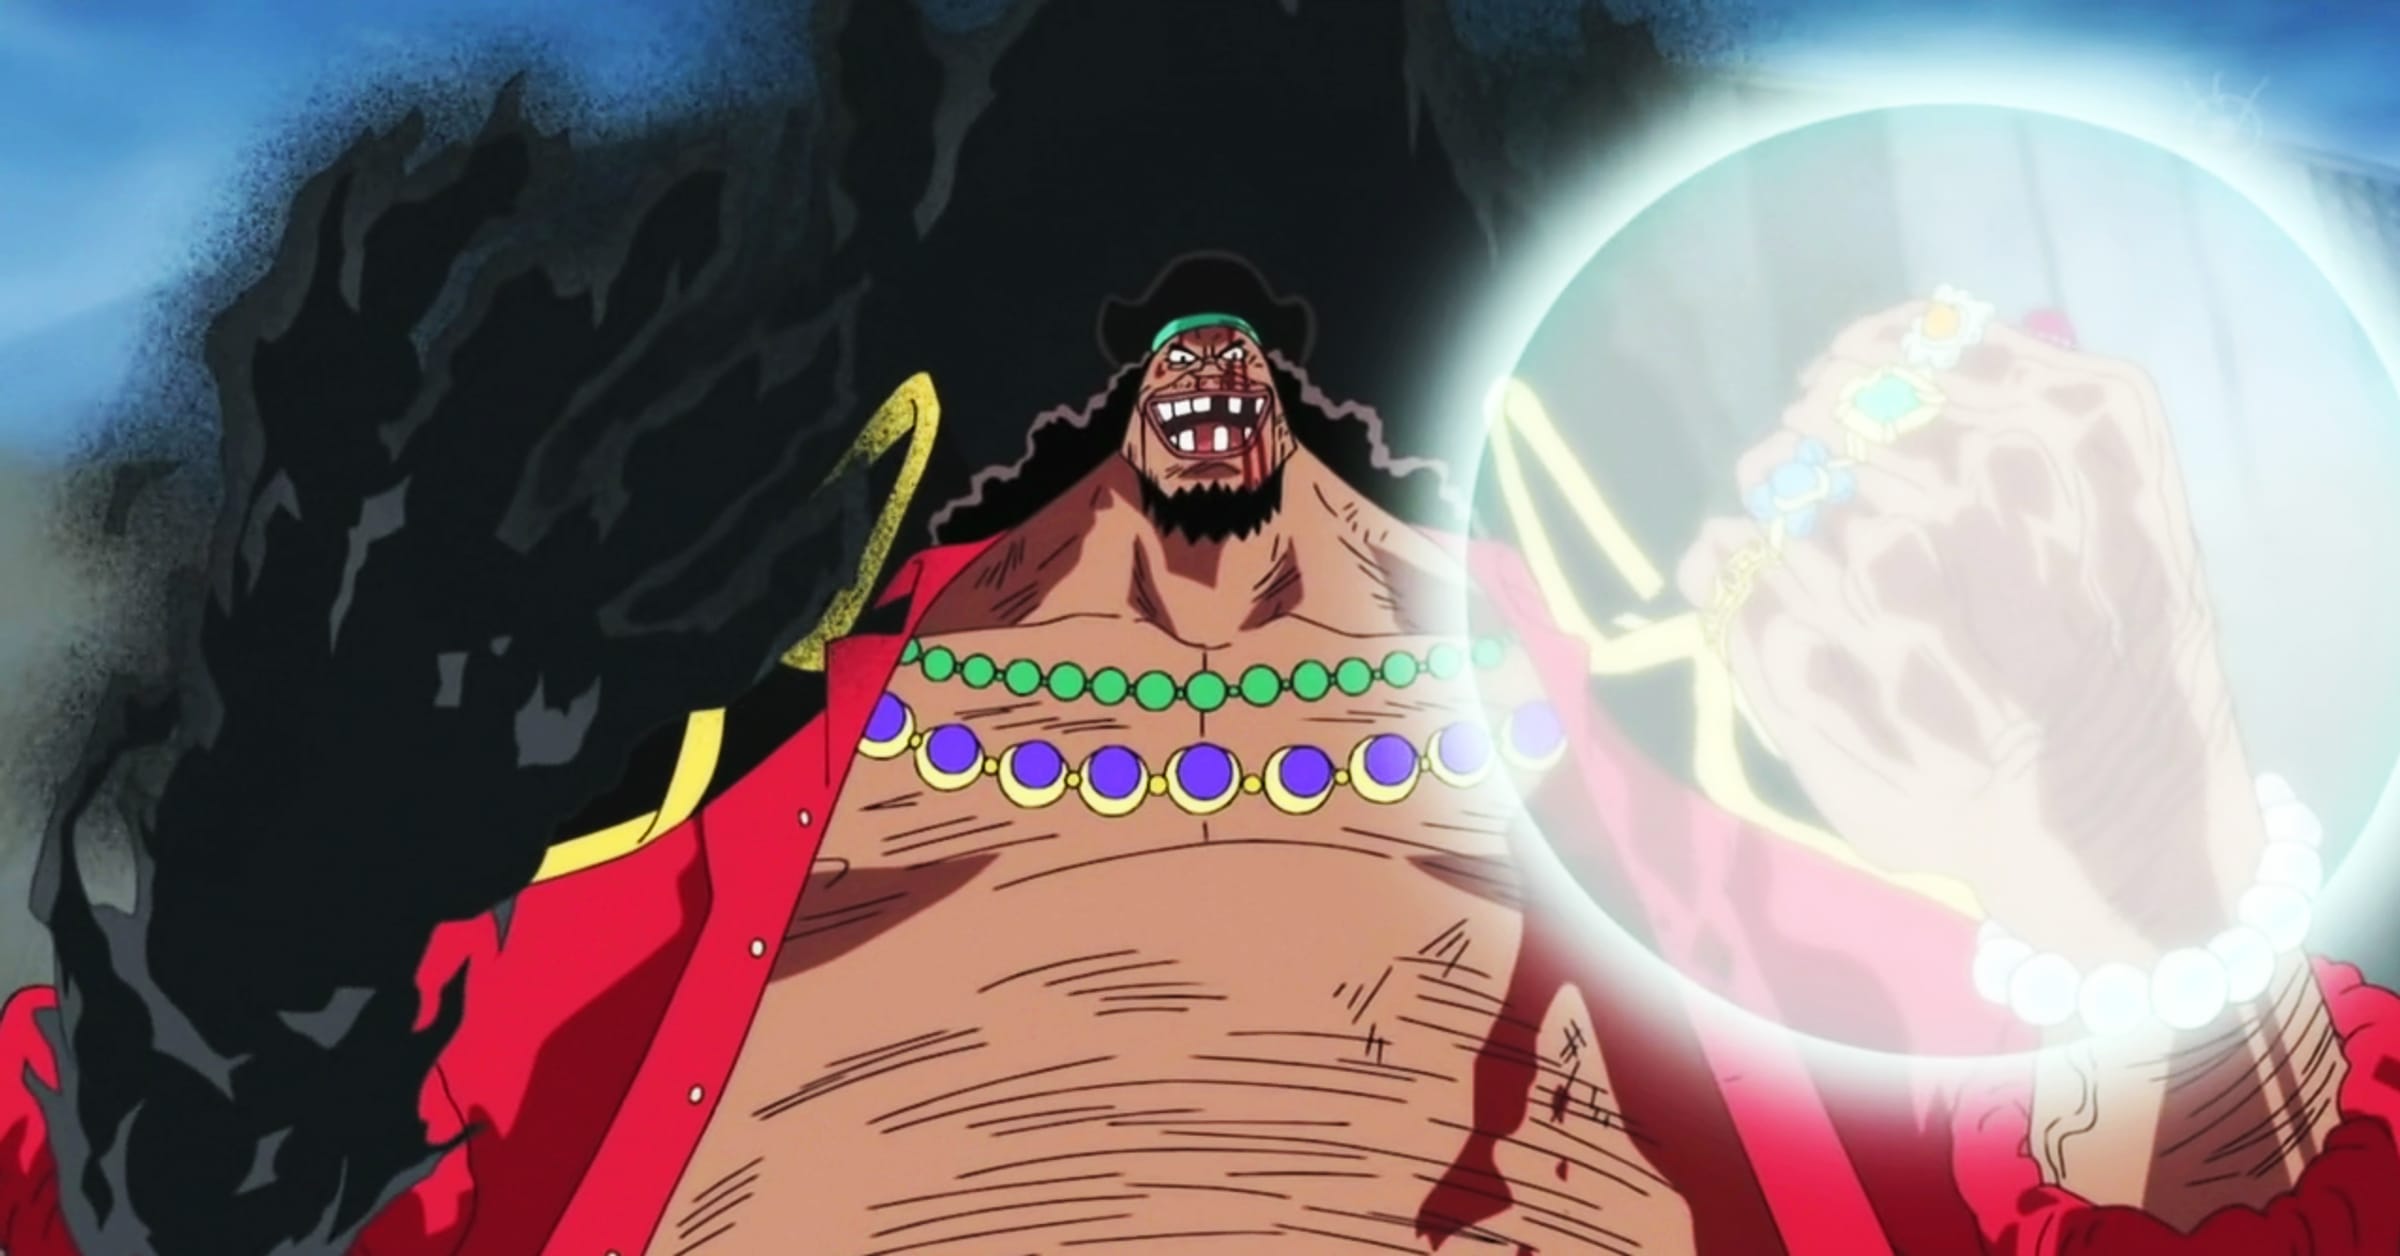 Did Whitebeard confirm the connection between Shanks and Rocks D